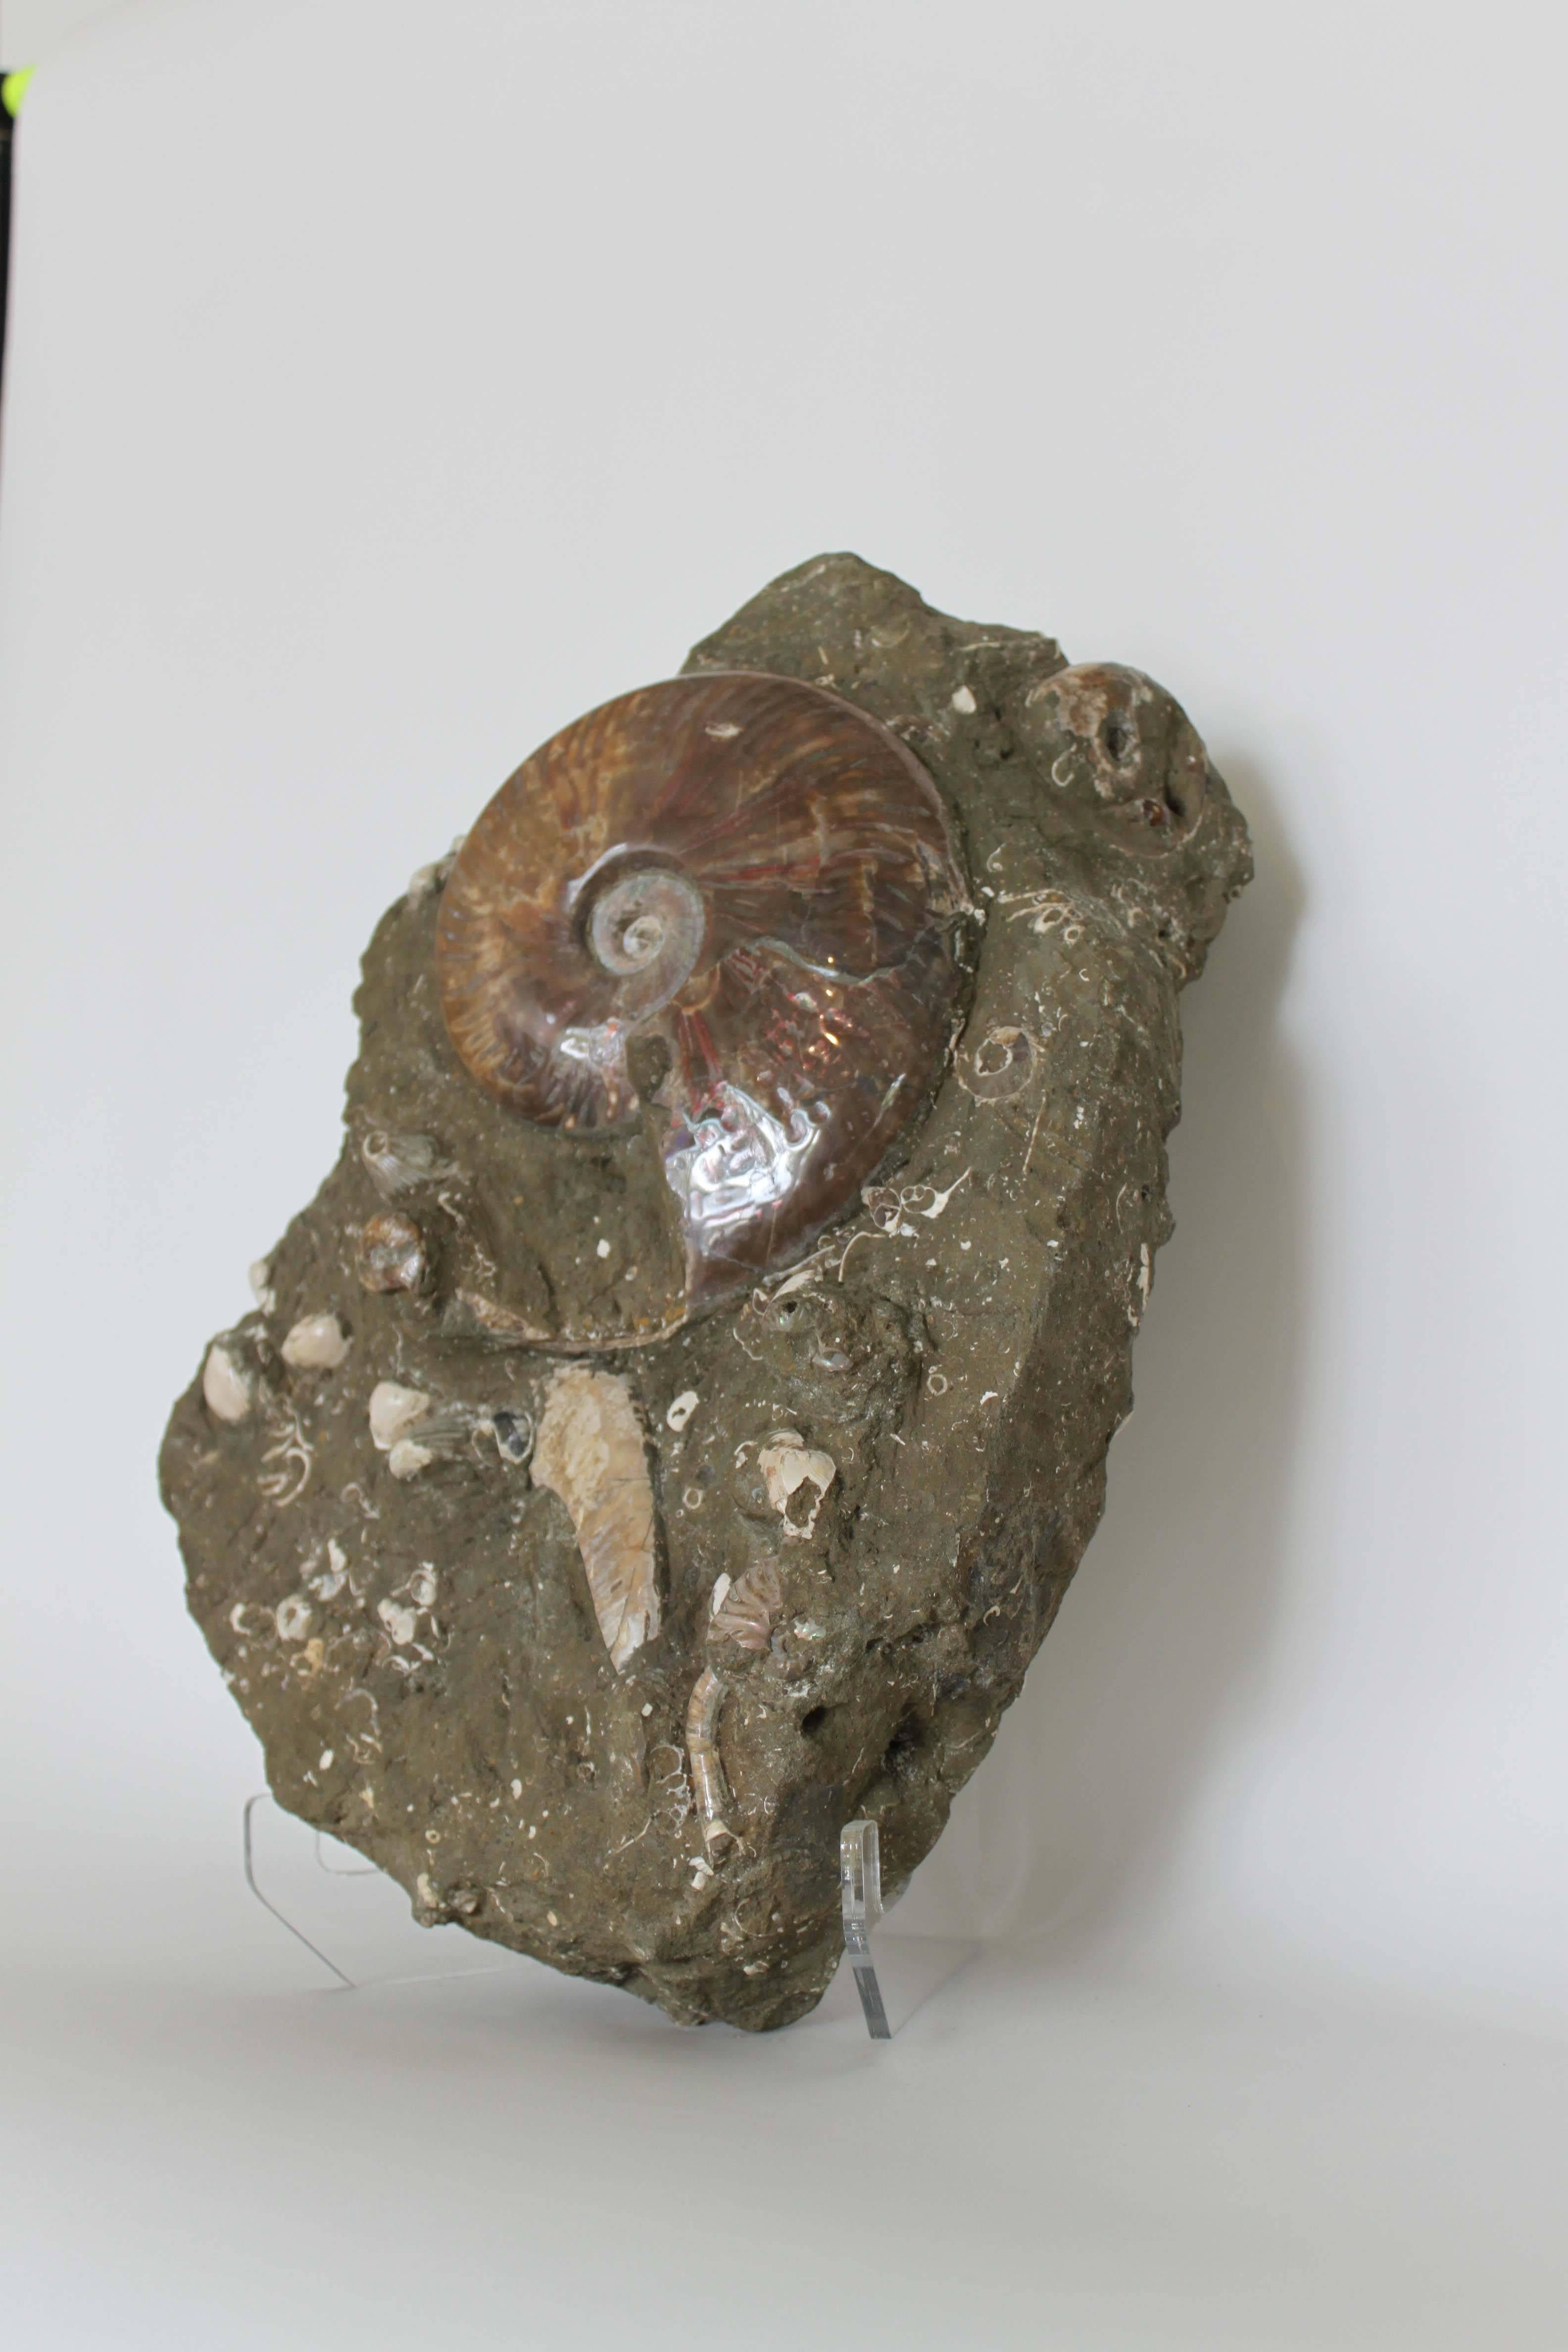 A beautiful fossil matrix exhibiting an exceptionally large piece of hand-polished ammonite.